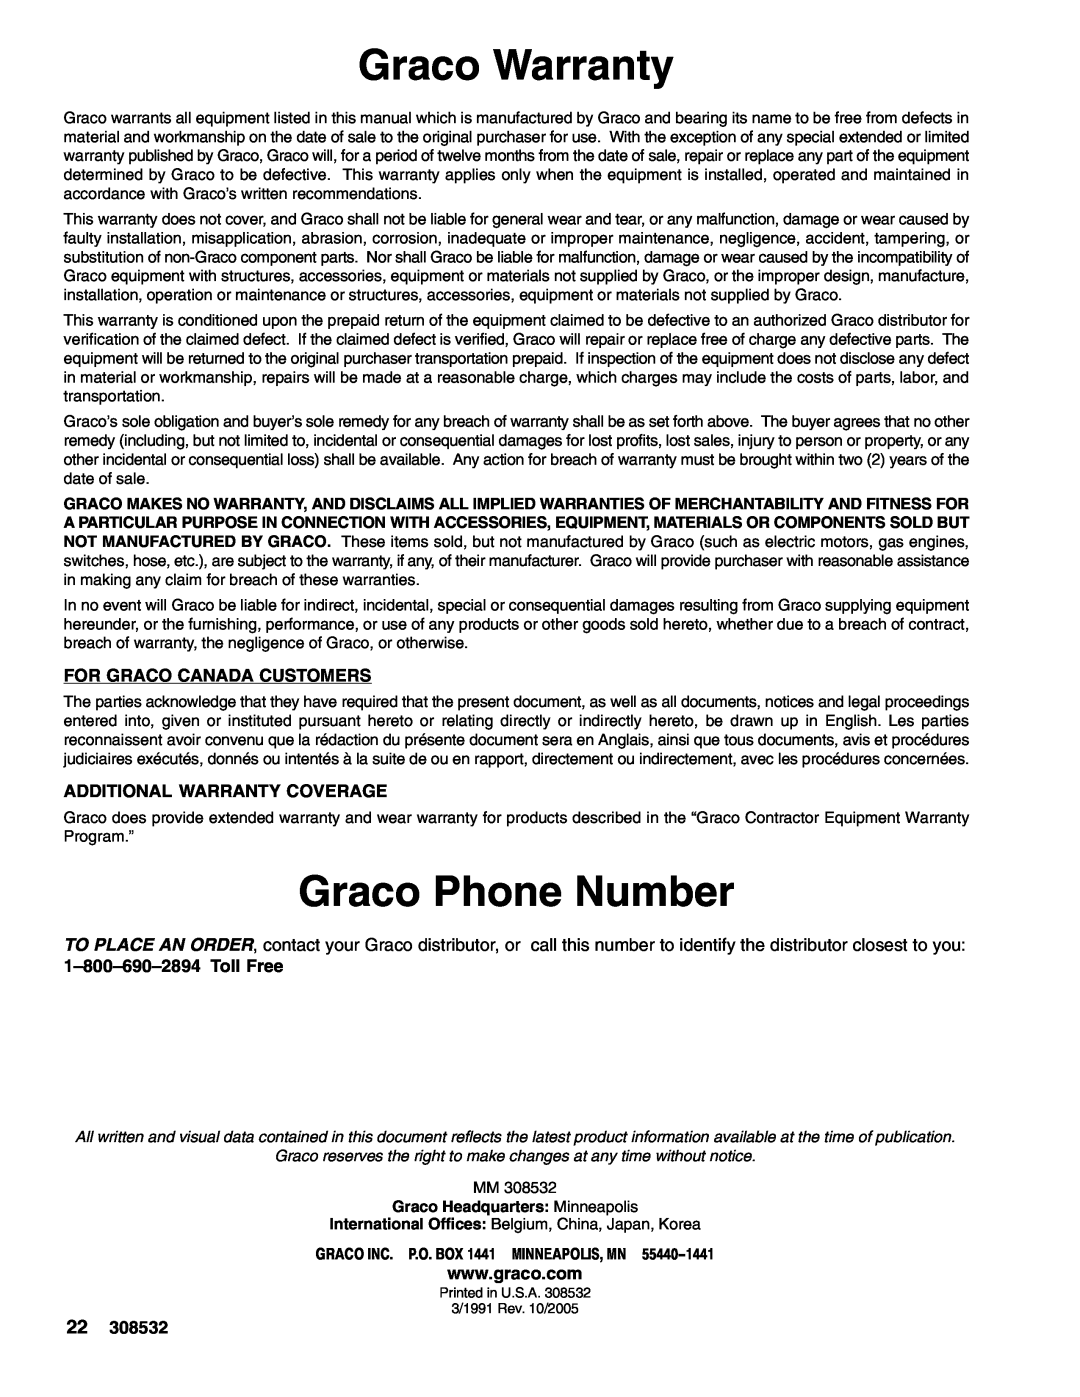 Hitachi 4043 Graco Warranty, Graco Phone Number, For Graco Canada Customers, Additional Warranty Coverage, 22308532 